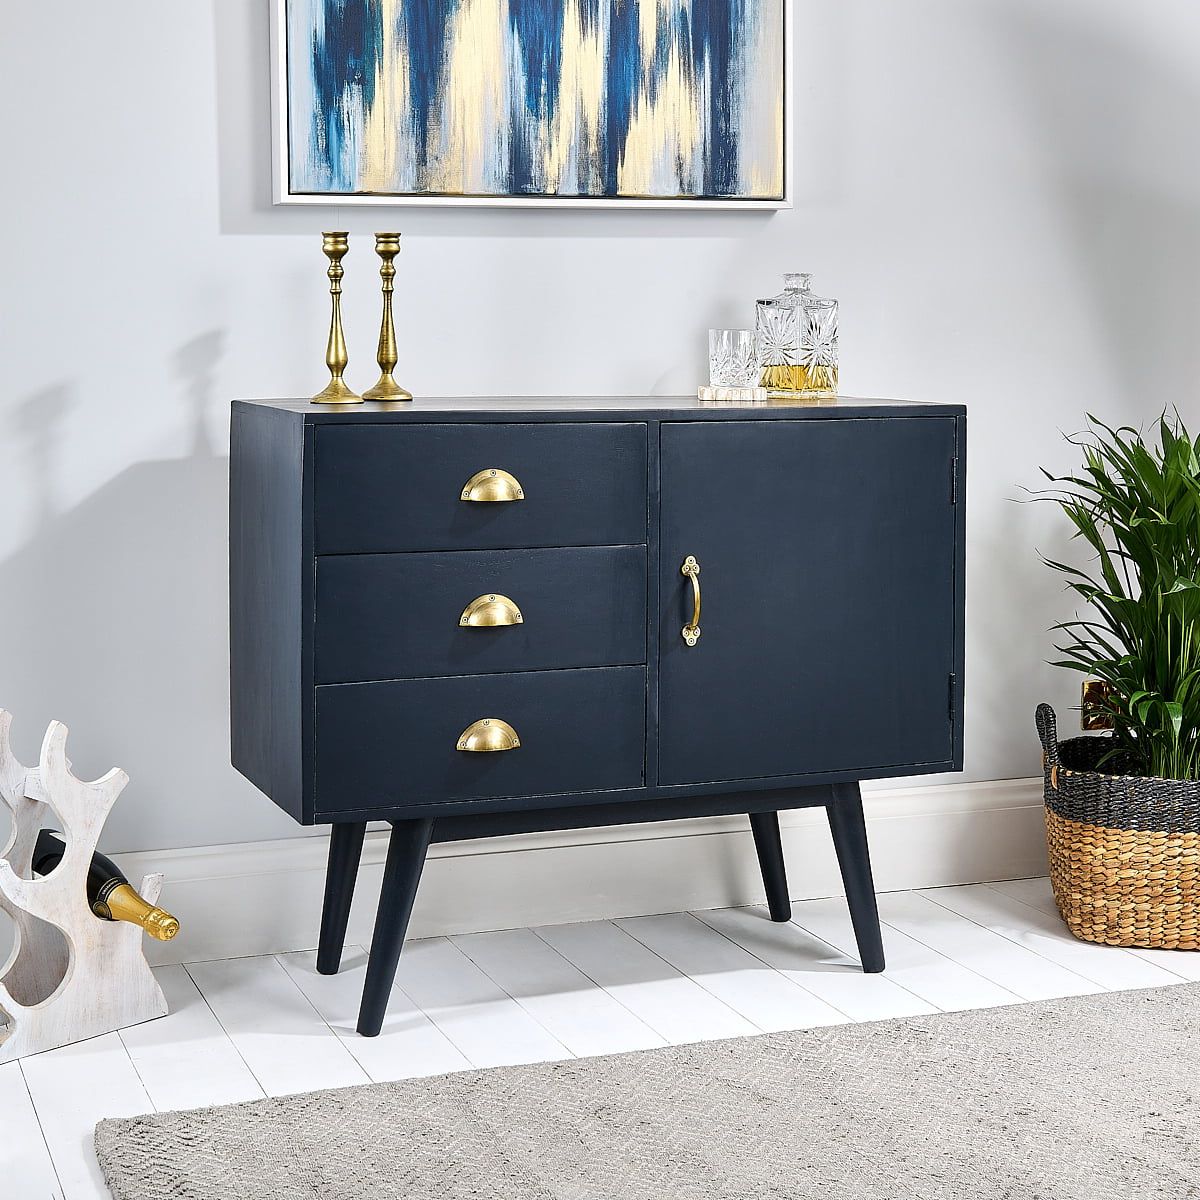 Antique Blue Sideboard Navy – Ellie – Zaza Homes Intended For Well Known Navy Blue Sideboards (View 3 of 15)